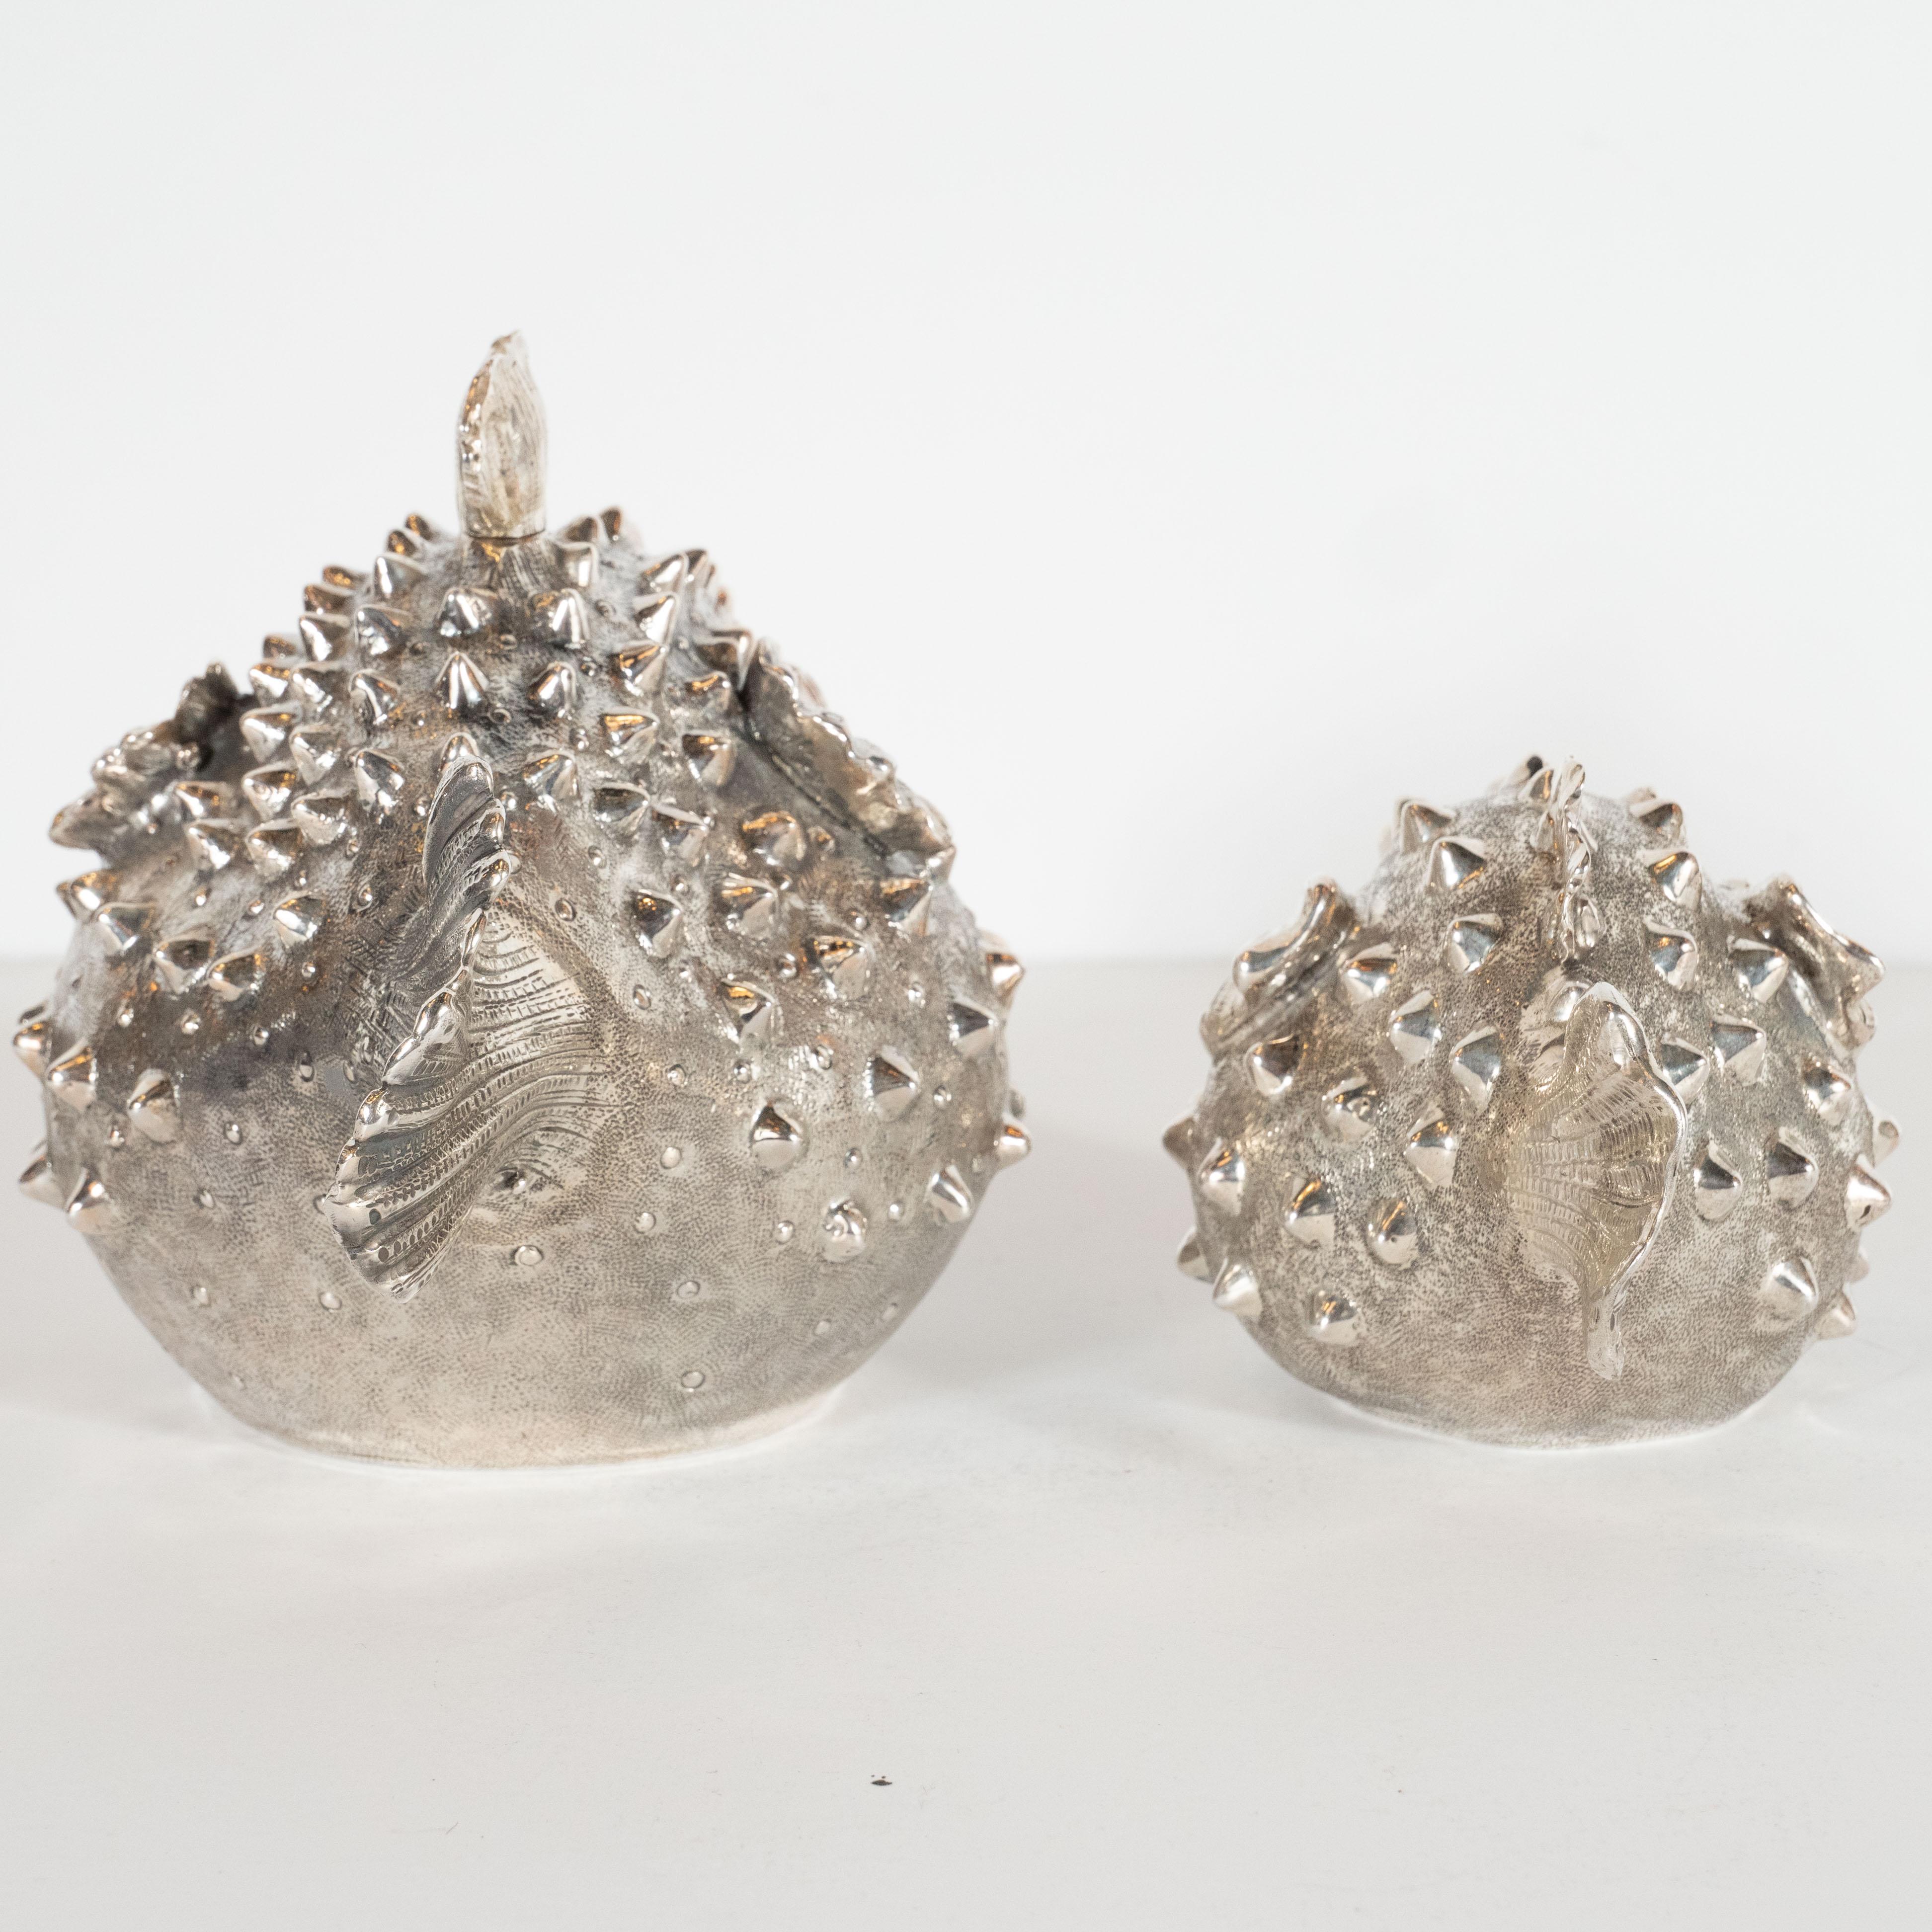 Handwrought Sterling Silver Puffer Fish Salt Shaker and Pepper Mill, Missiaglia In Excellent Condition For Sale In New York, NY